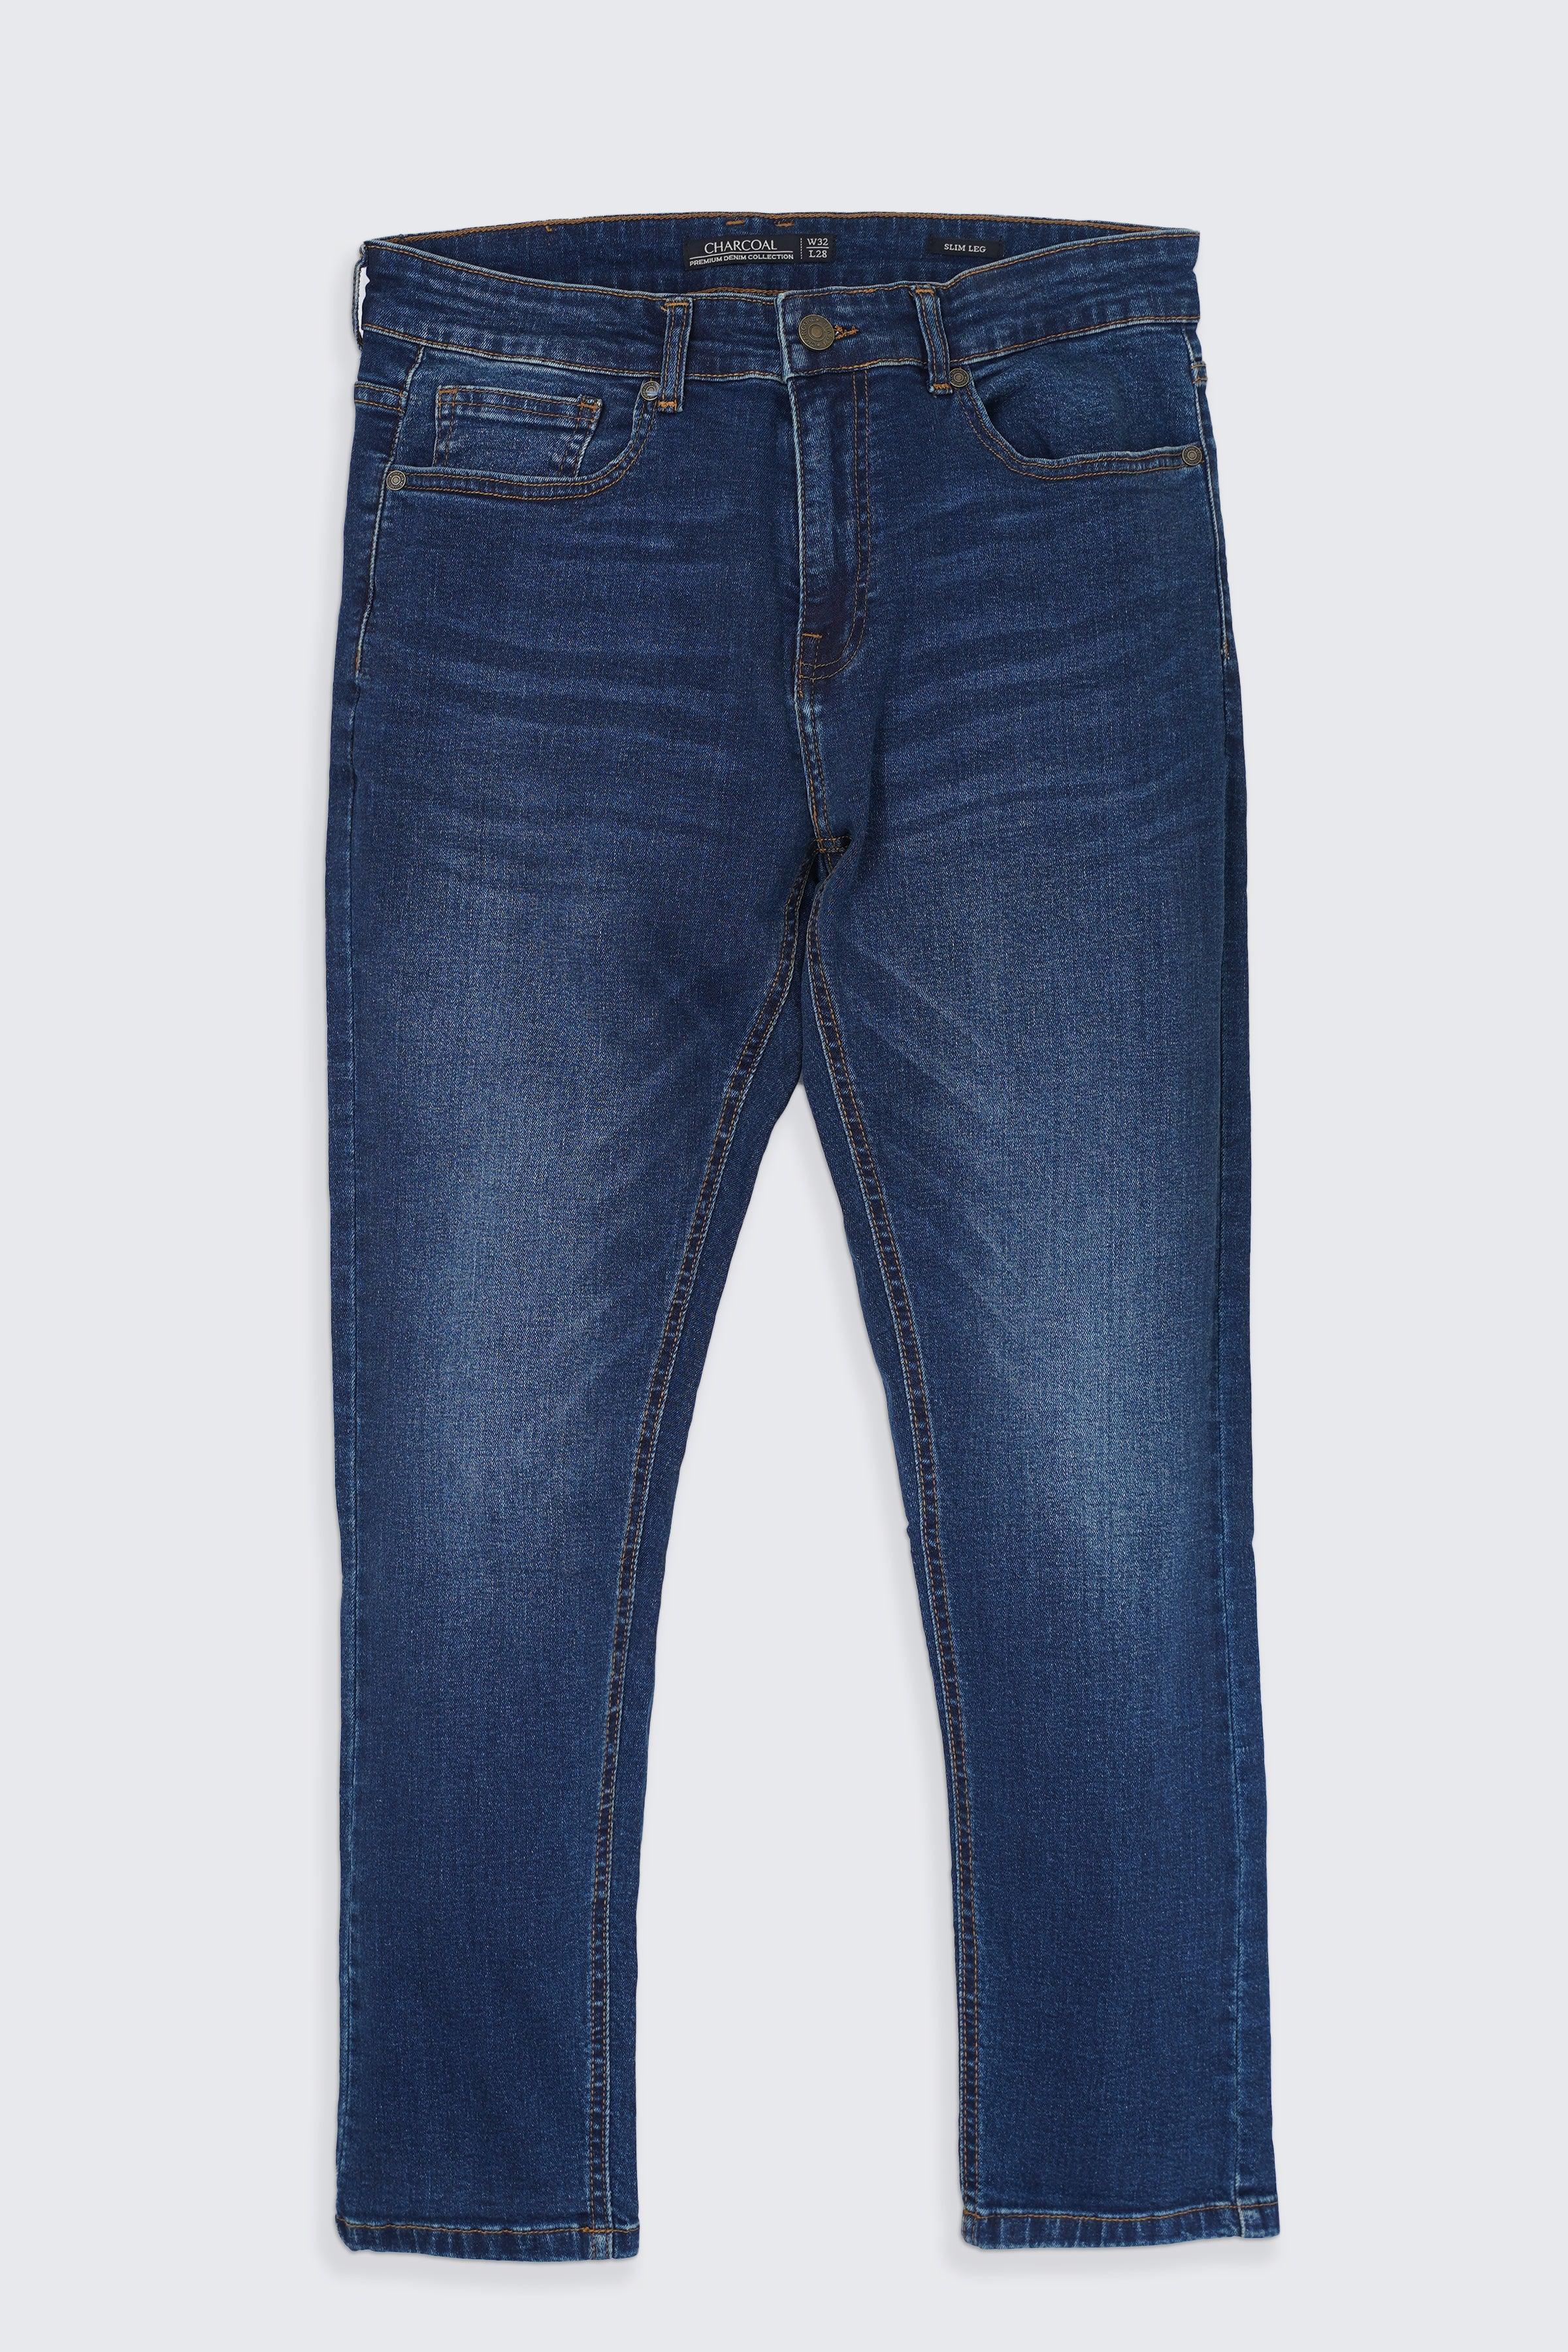 SLIM FIT LEG JEANS DARK BLUE TINTED at Charcoal Clothing